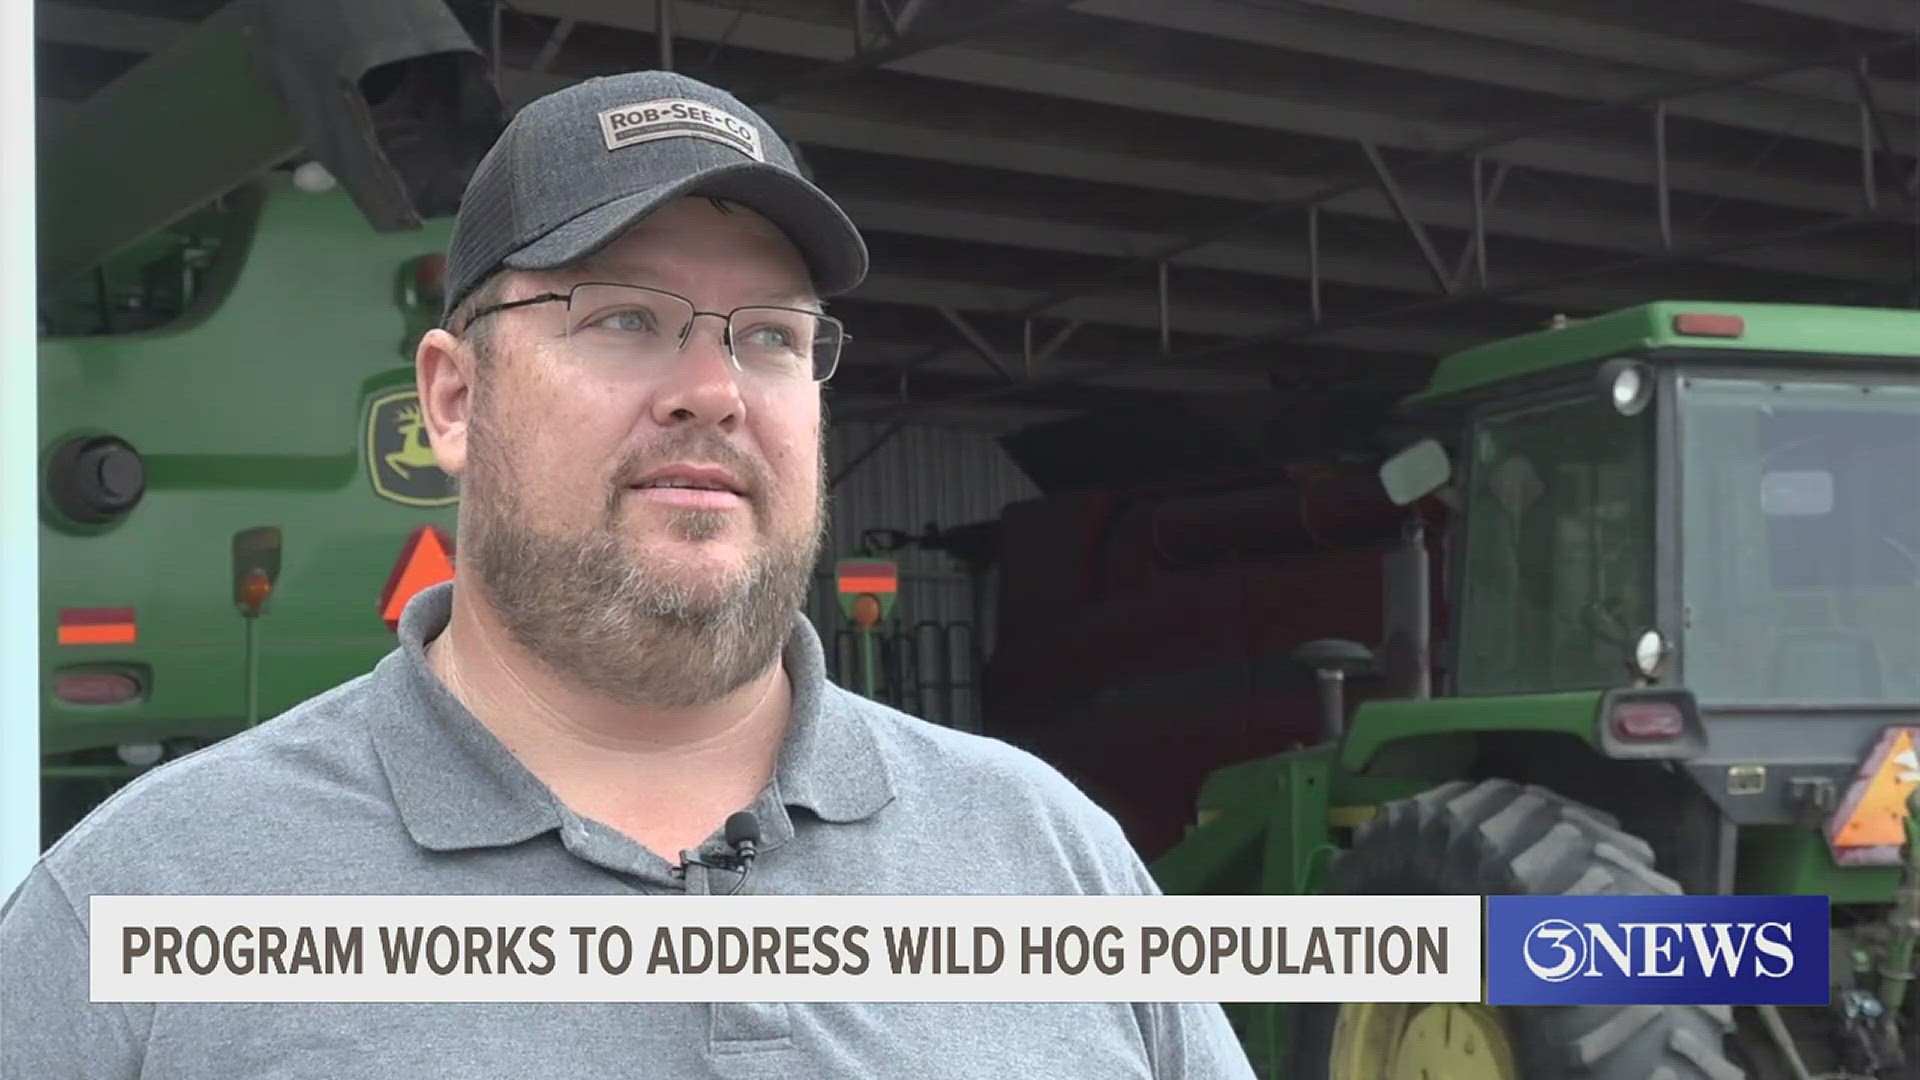 Texas A&M AgriLife Extension Wildlife Services State Director Michael Bodenchuck said that out of 31 counties, Nueces is only one of two in our area to get funding.